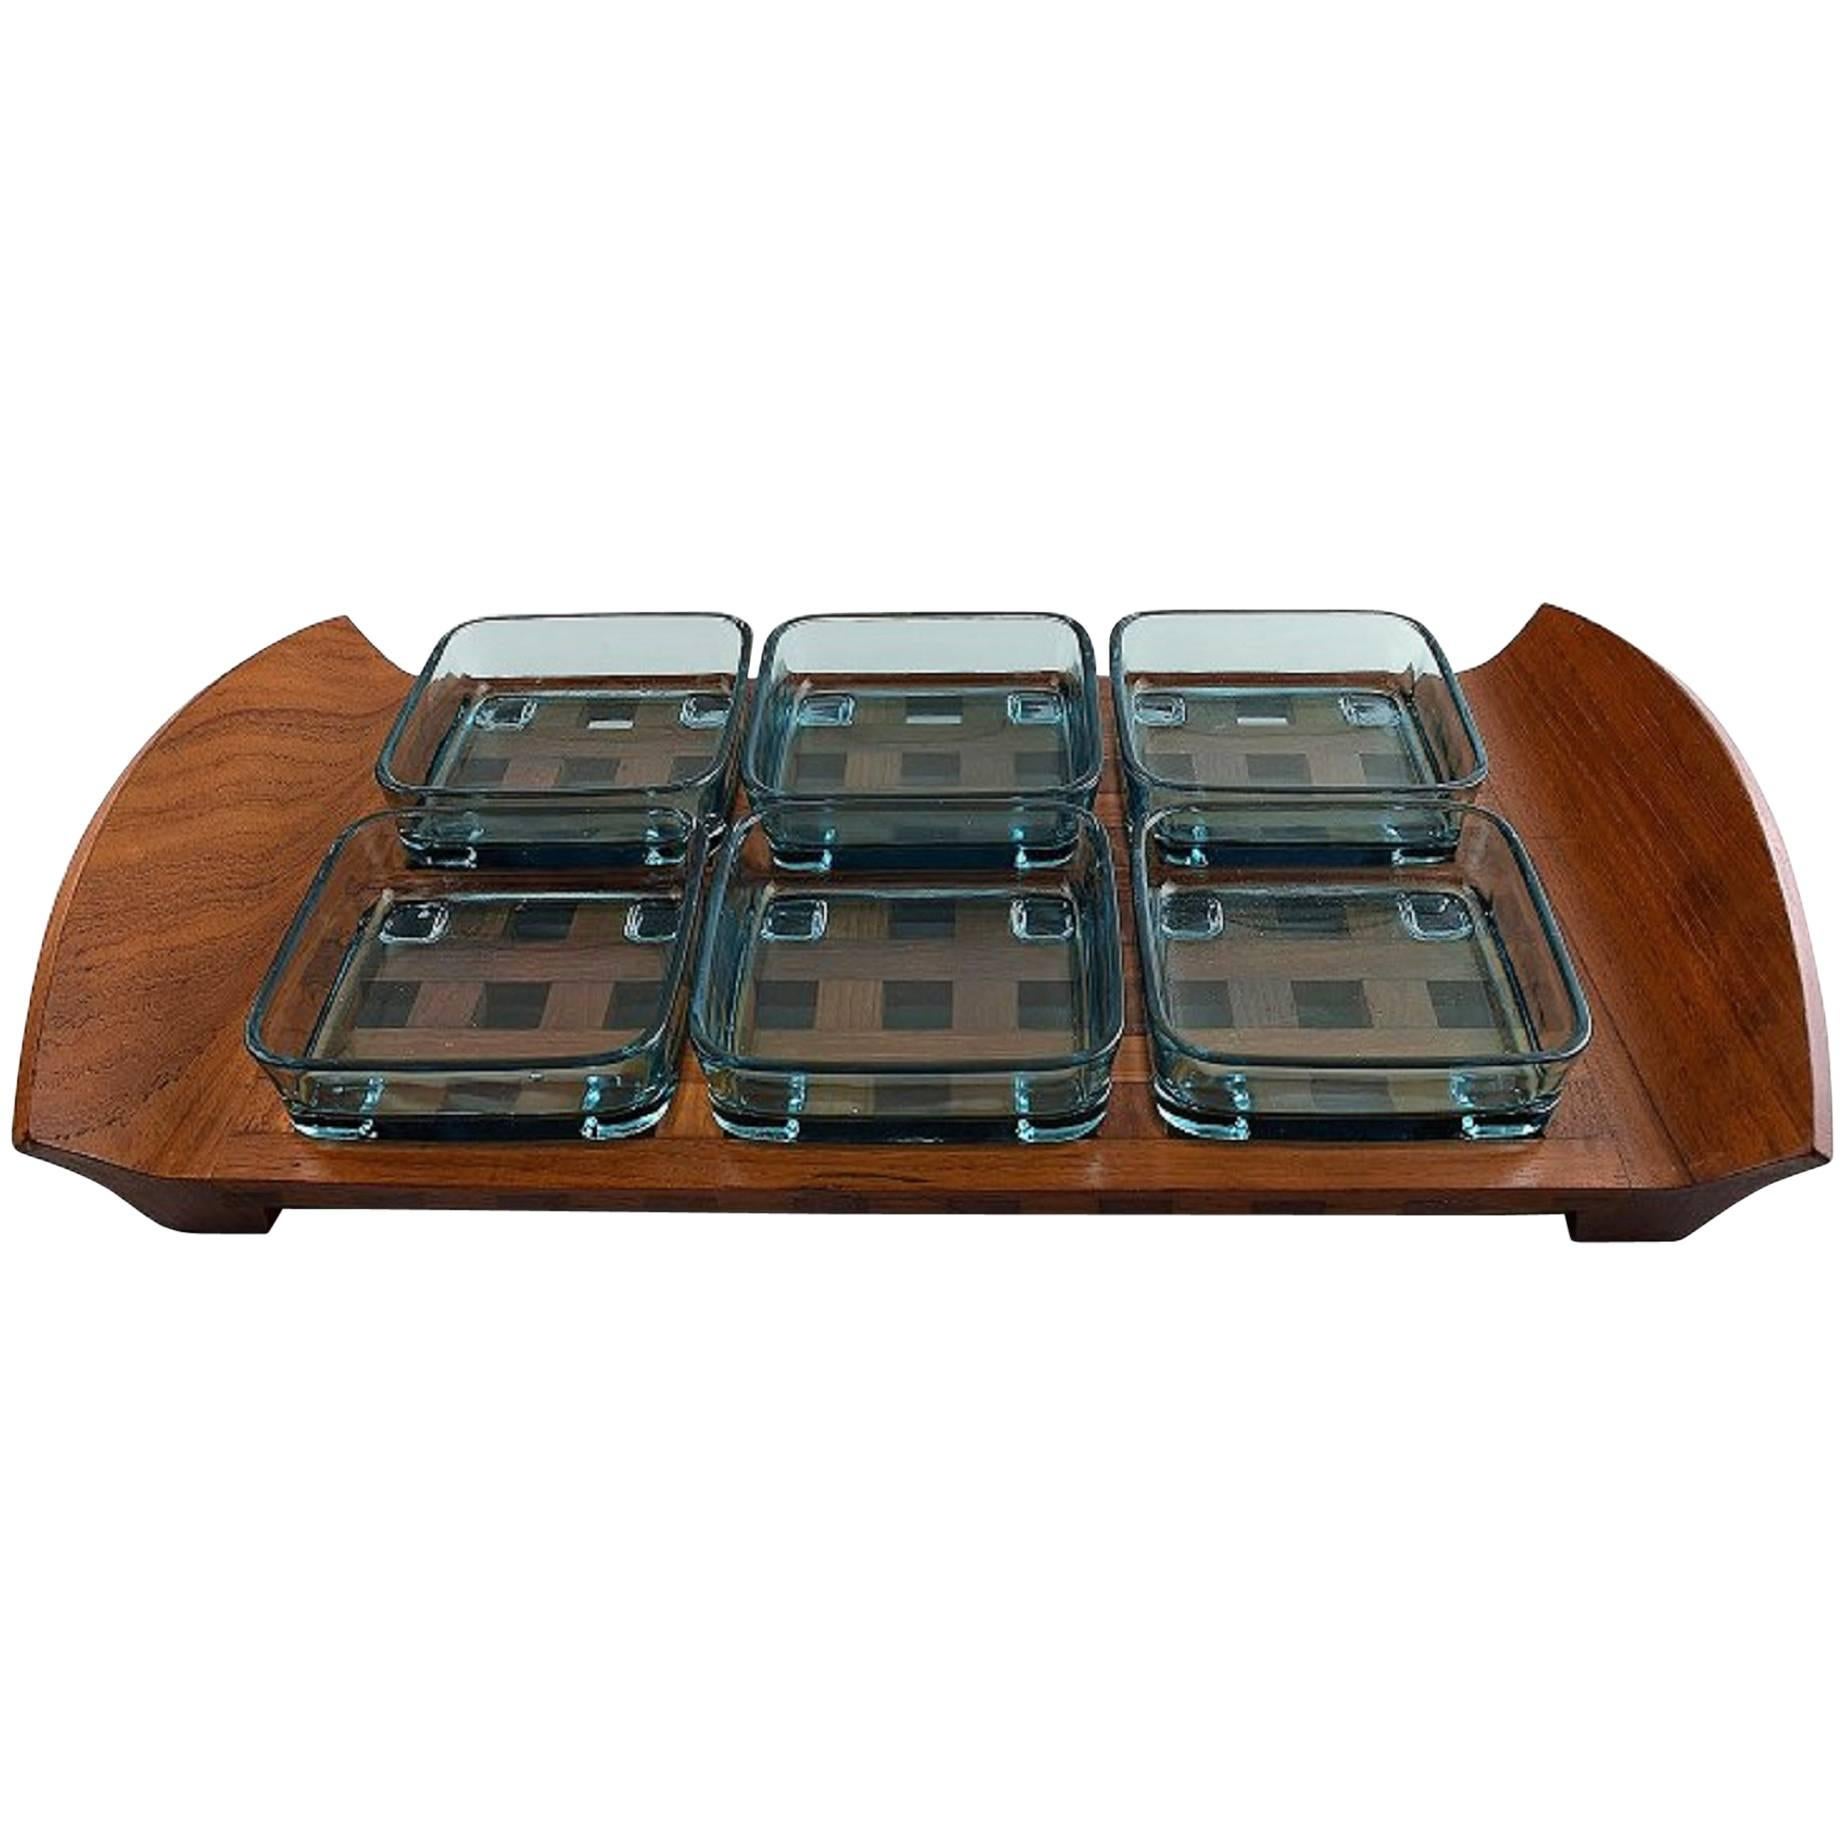 Jens Harald Quistgaard, Tray in Teak with Six Containers in Colored Glass